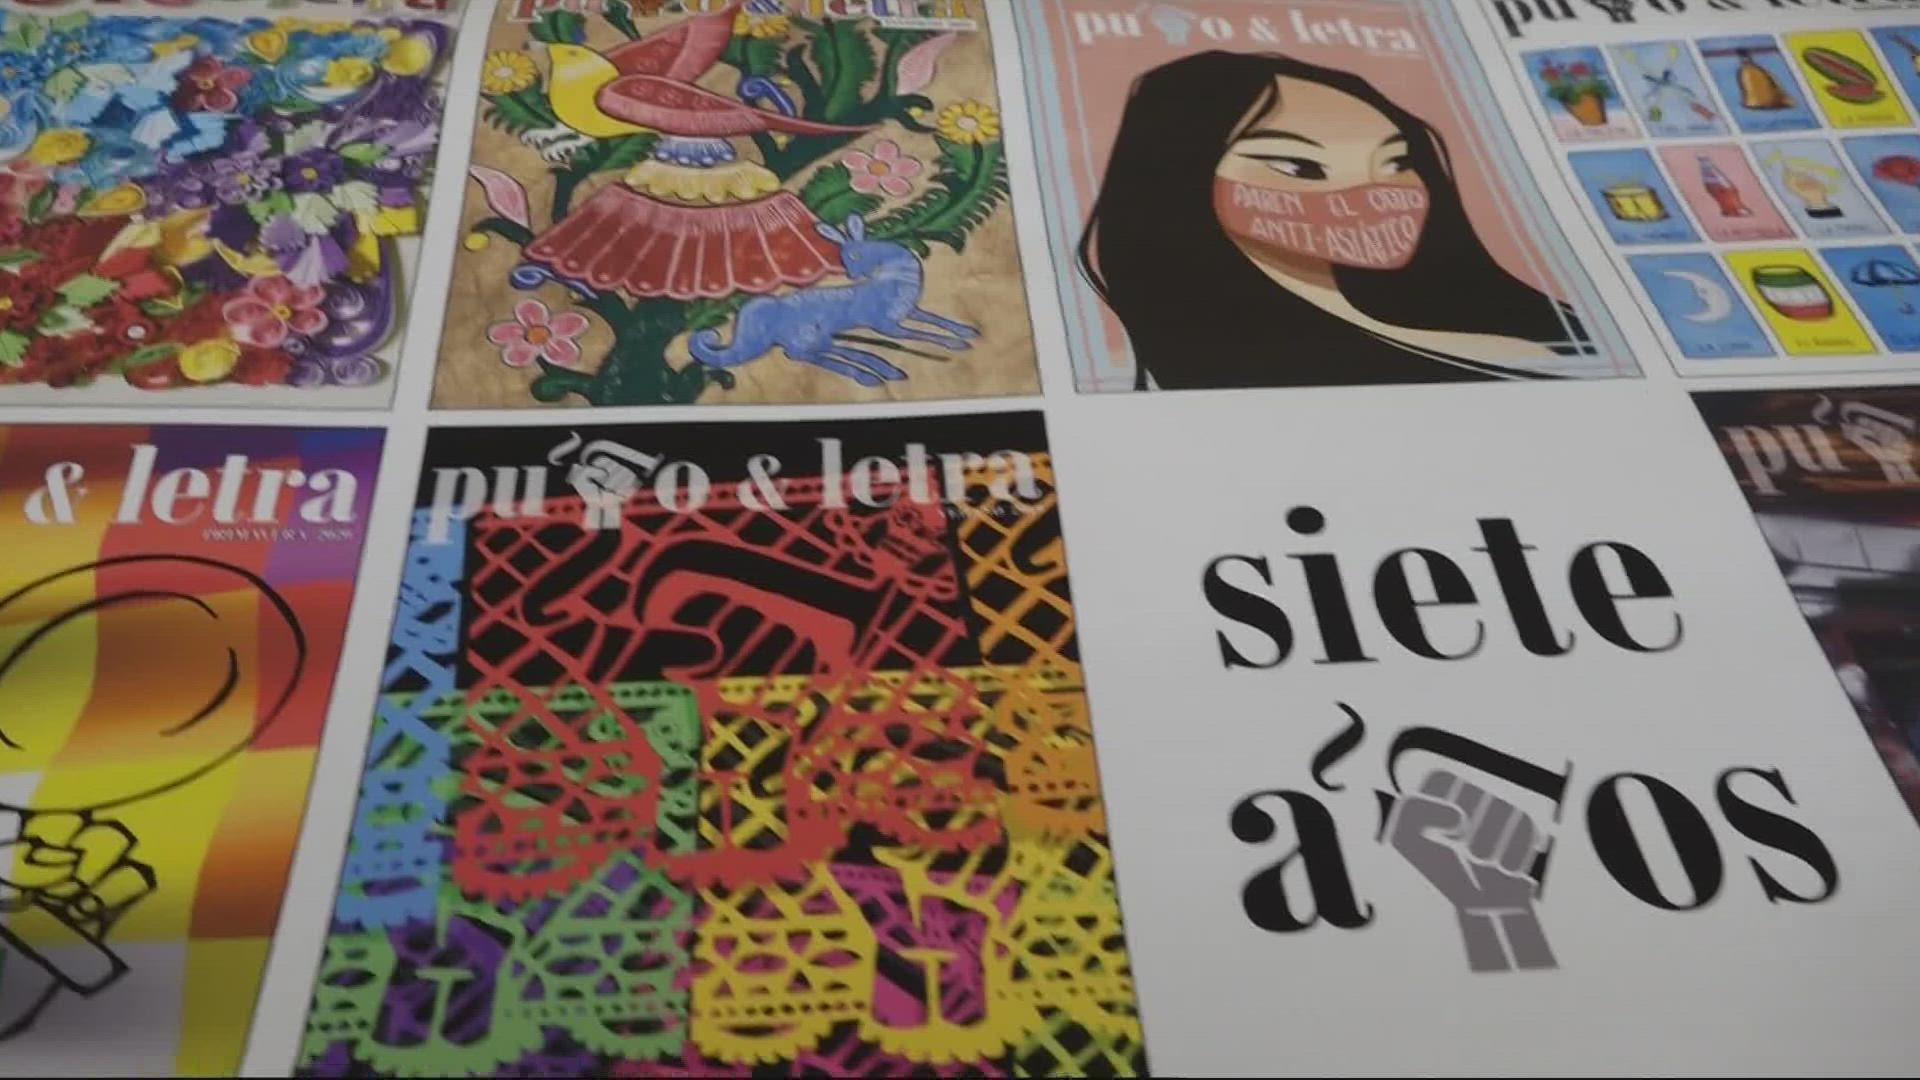 Lincoln High School students have created and published an all-Spanish-language student magazine twice a year for the last 8 years.